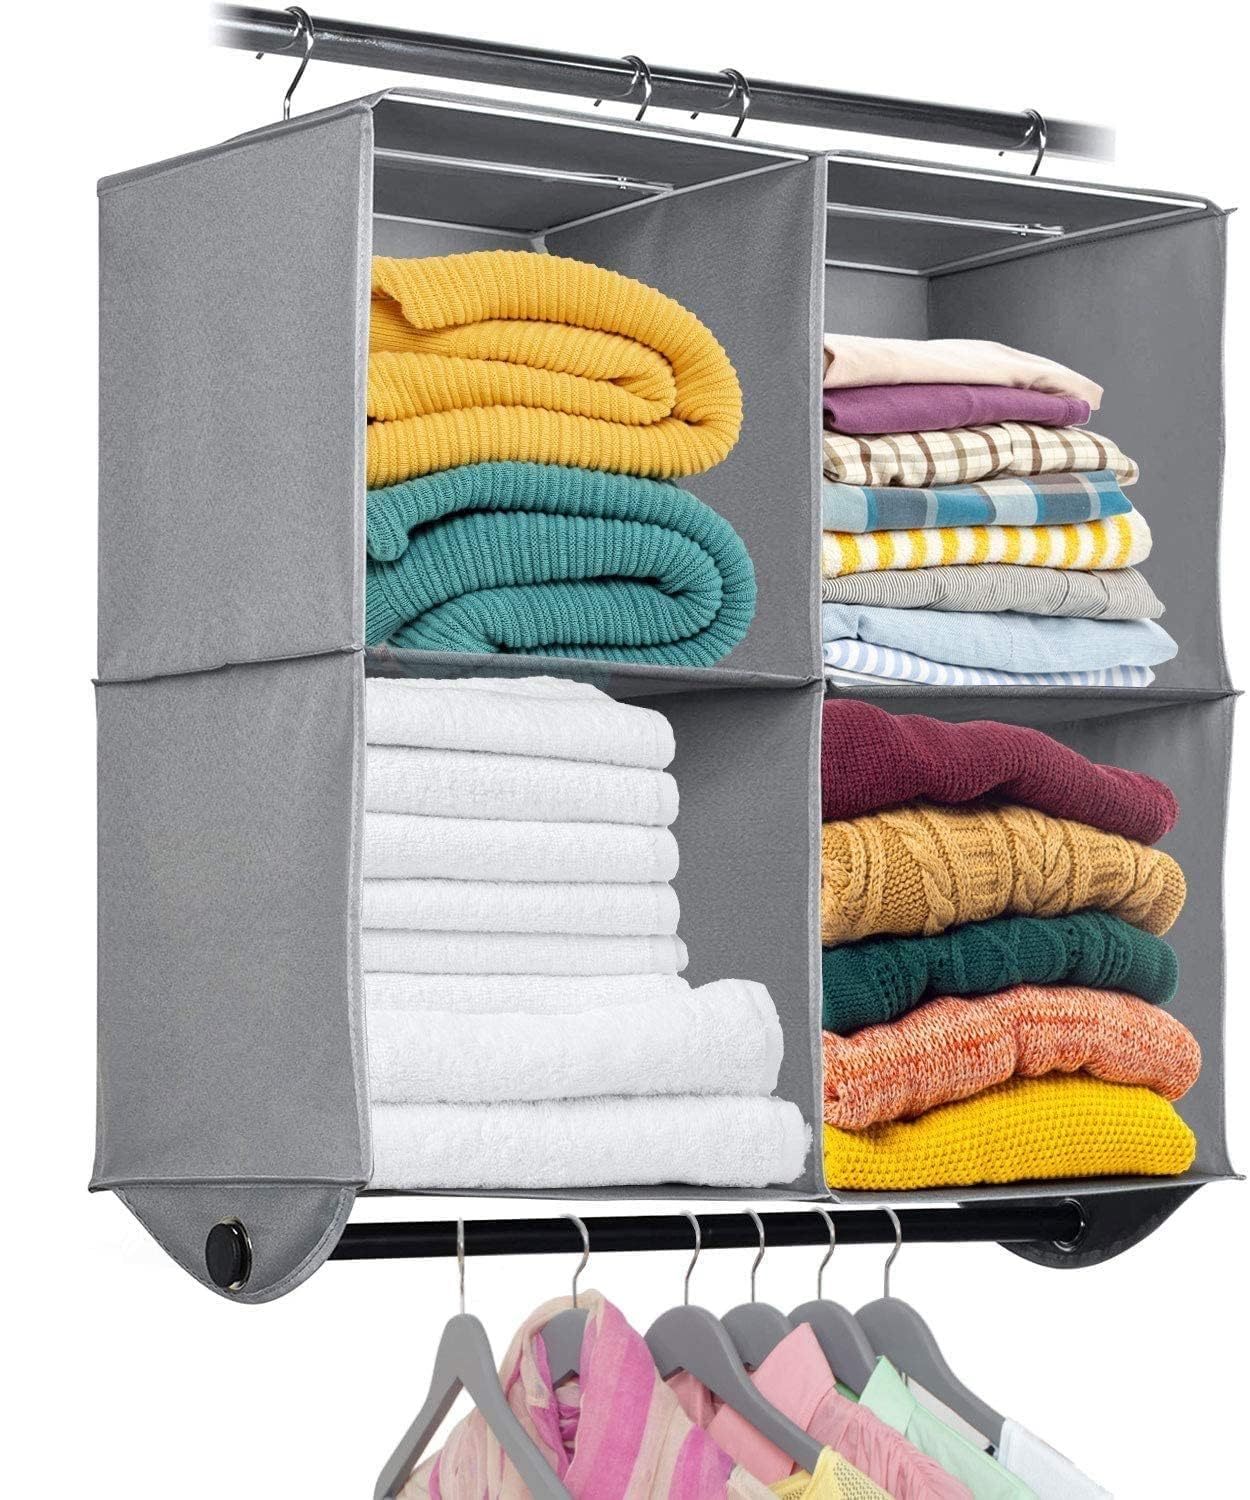 Hanging Closet Organizers with 4 Shelves - Closet Storage and RV Closet Organizer - Grey with Black Metal Rod - 24� W x 12� D x 29-1/2� H - Perfect for College Dorms  - Acceptable